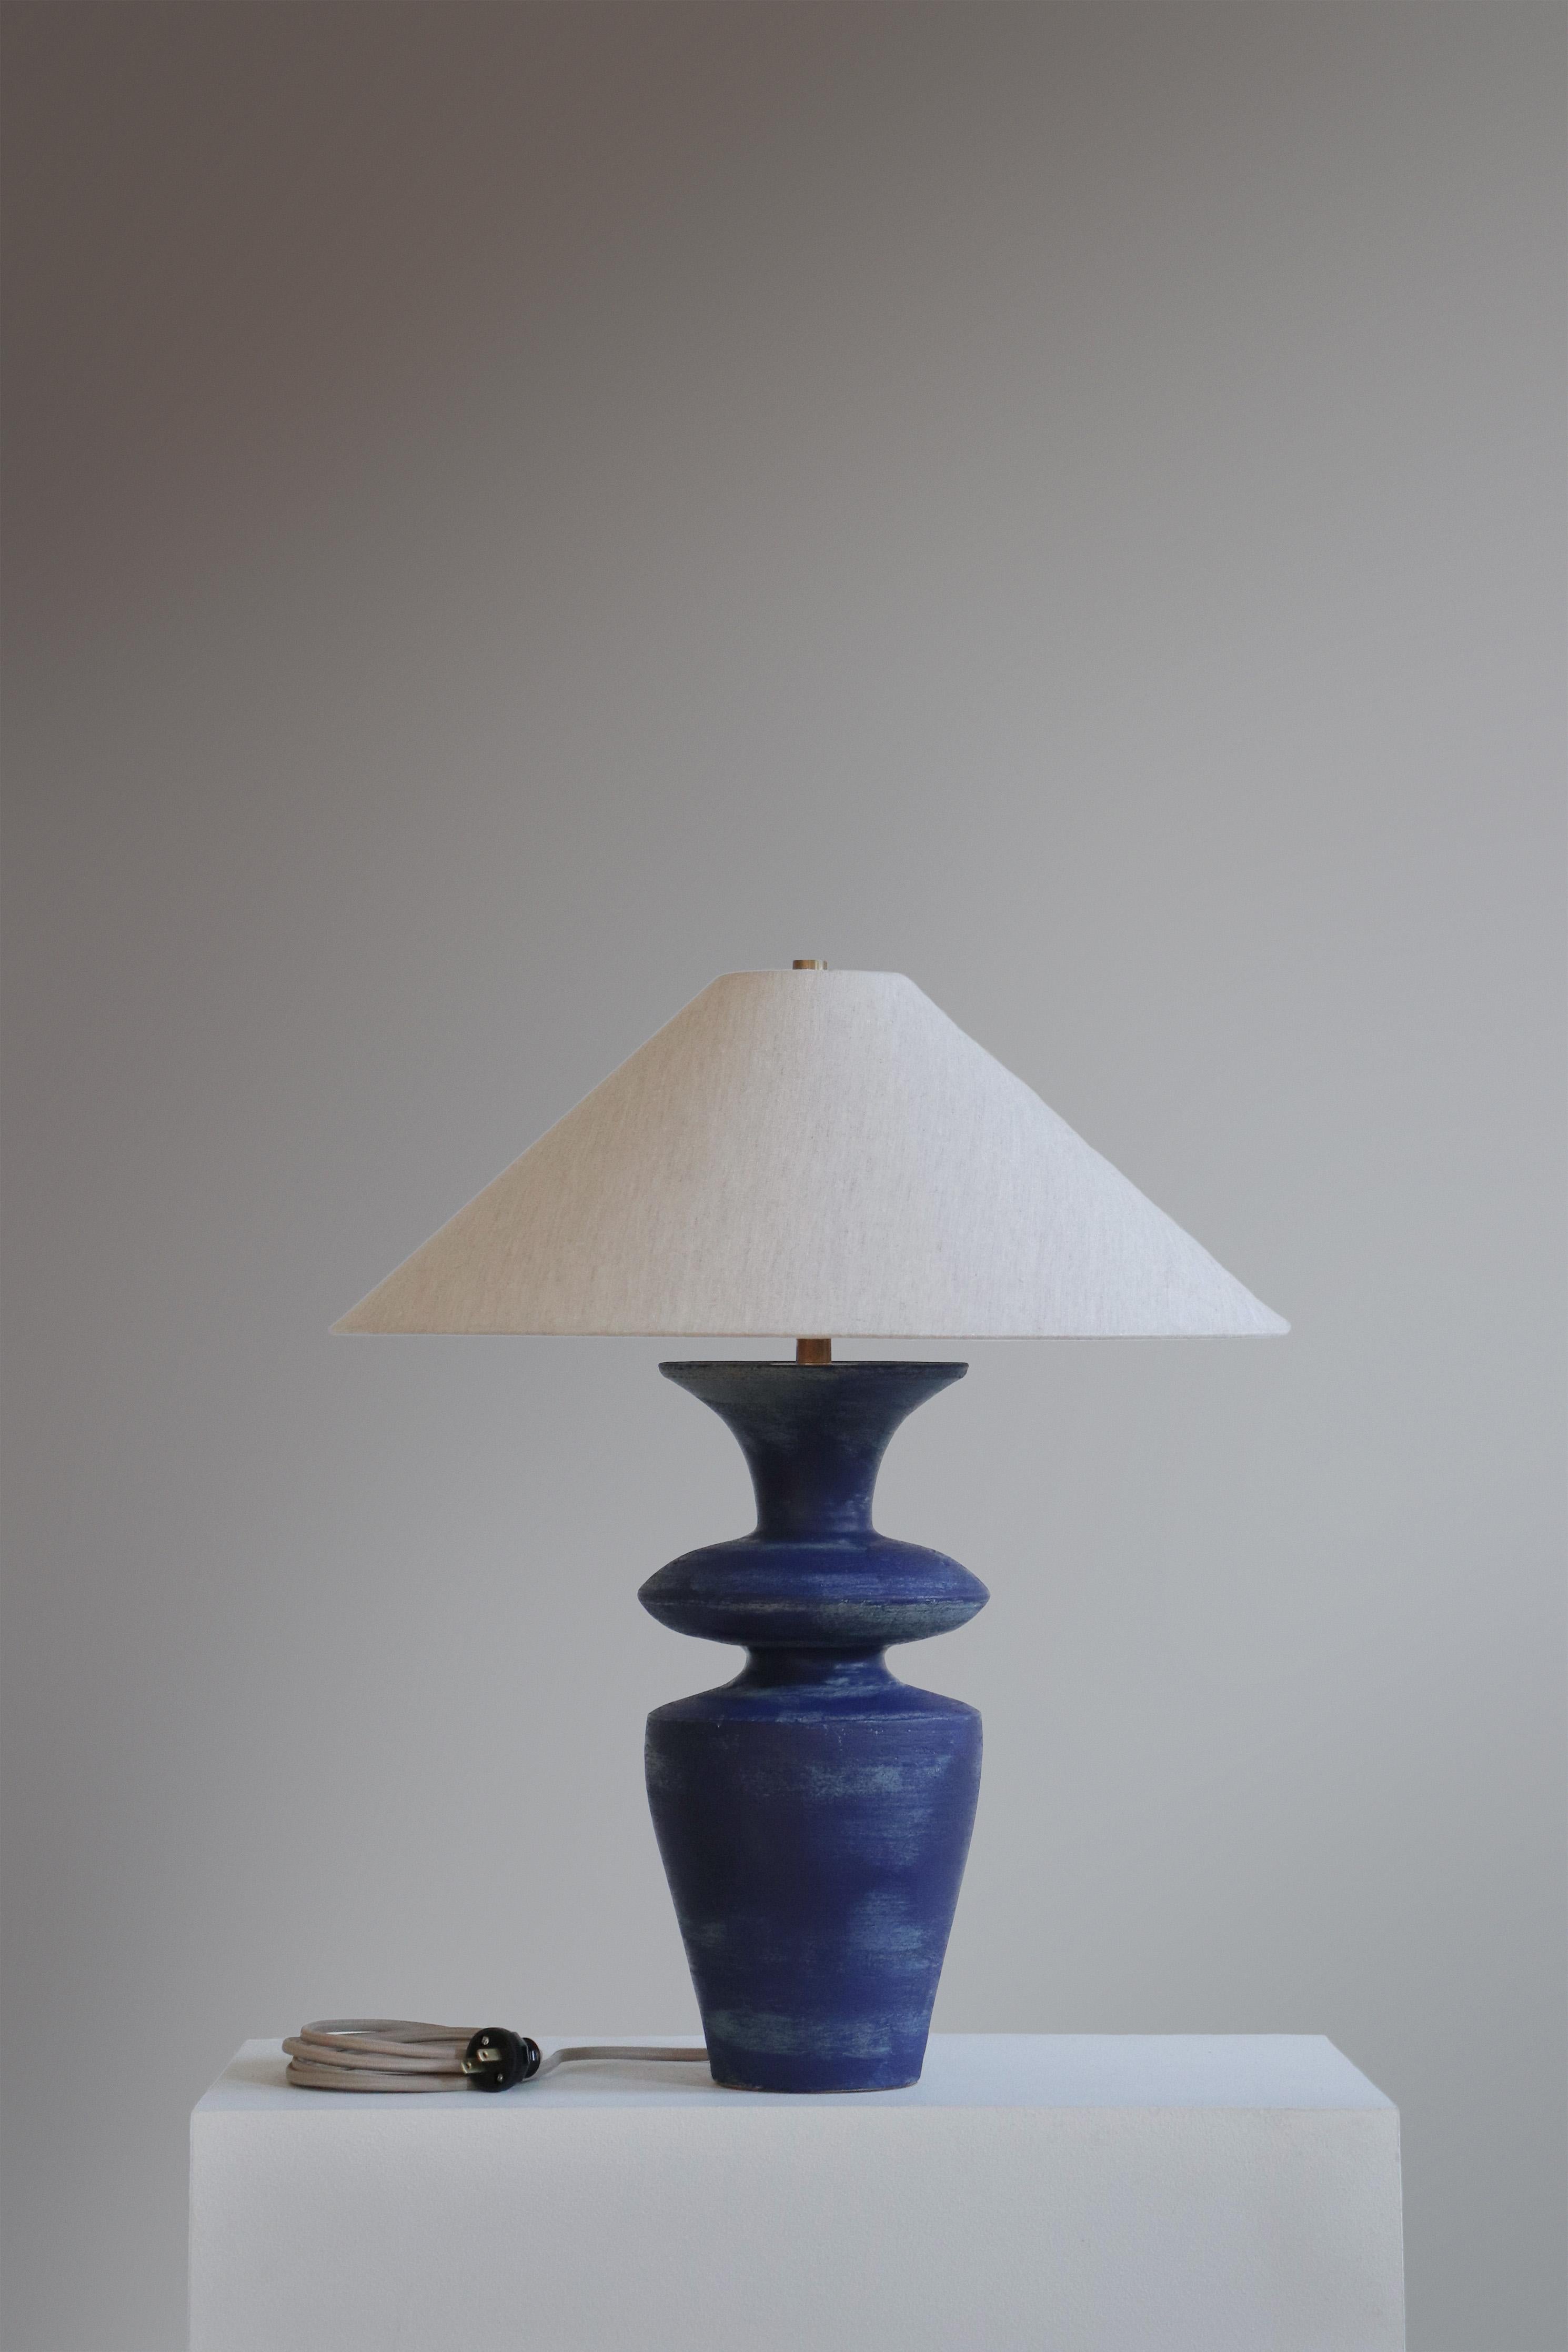 Lapis Rhodes Table Lamp by Danny Kaplan Studio
Dimensions: ⌀ 51 x H 69 cm
Materials: Glazed Ceramic, Unfinished Brass, Linen

This item is handmade, and may exhibit variability within the same piece. We do our best to maintain a consistent product,